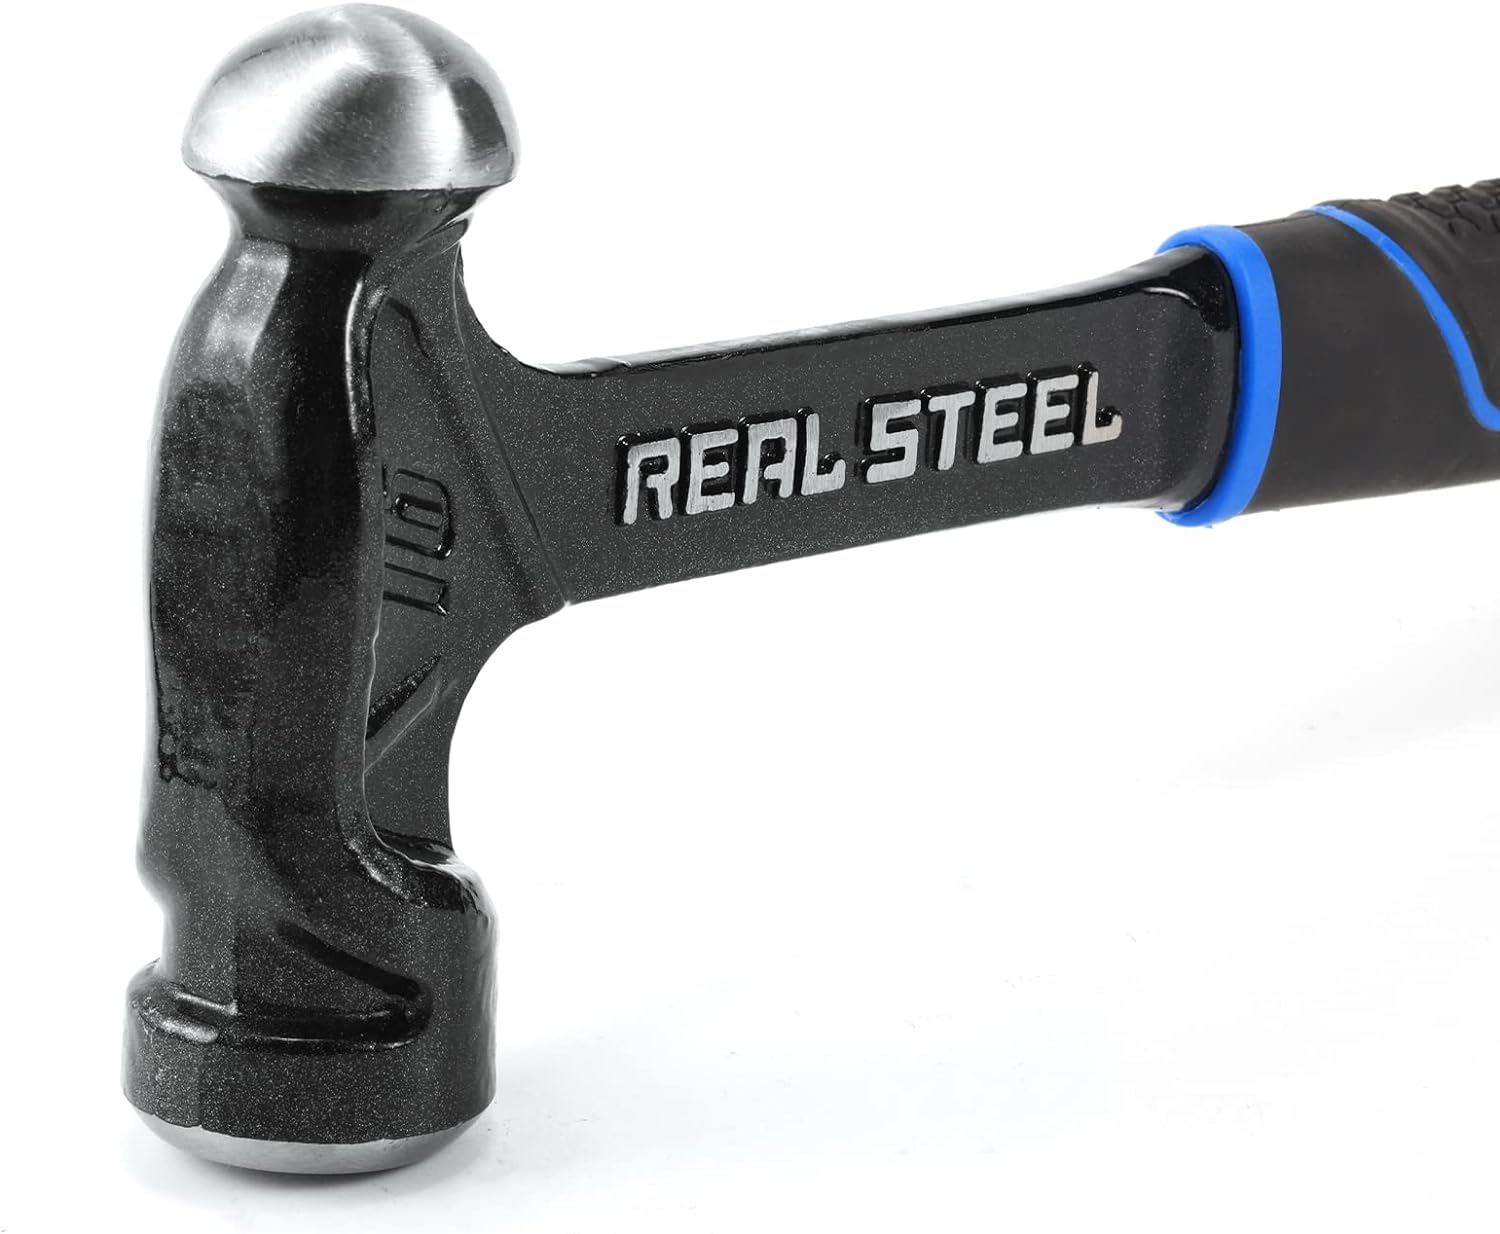 Real Steel Hammer Ball Pein 700g 24oz Ultra Steel Handle Real Steel RSH0519 Power Tool Services